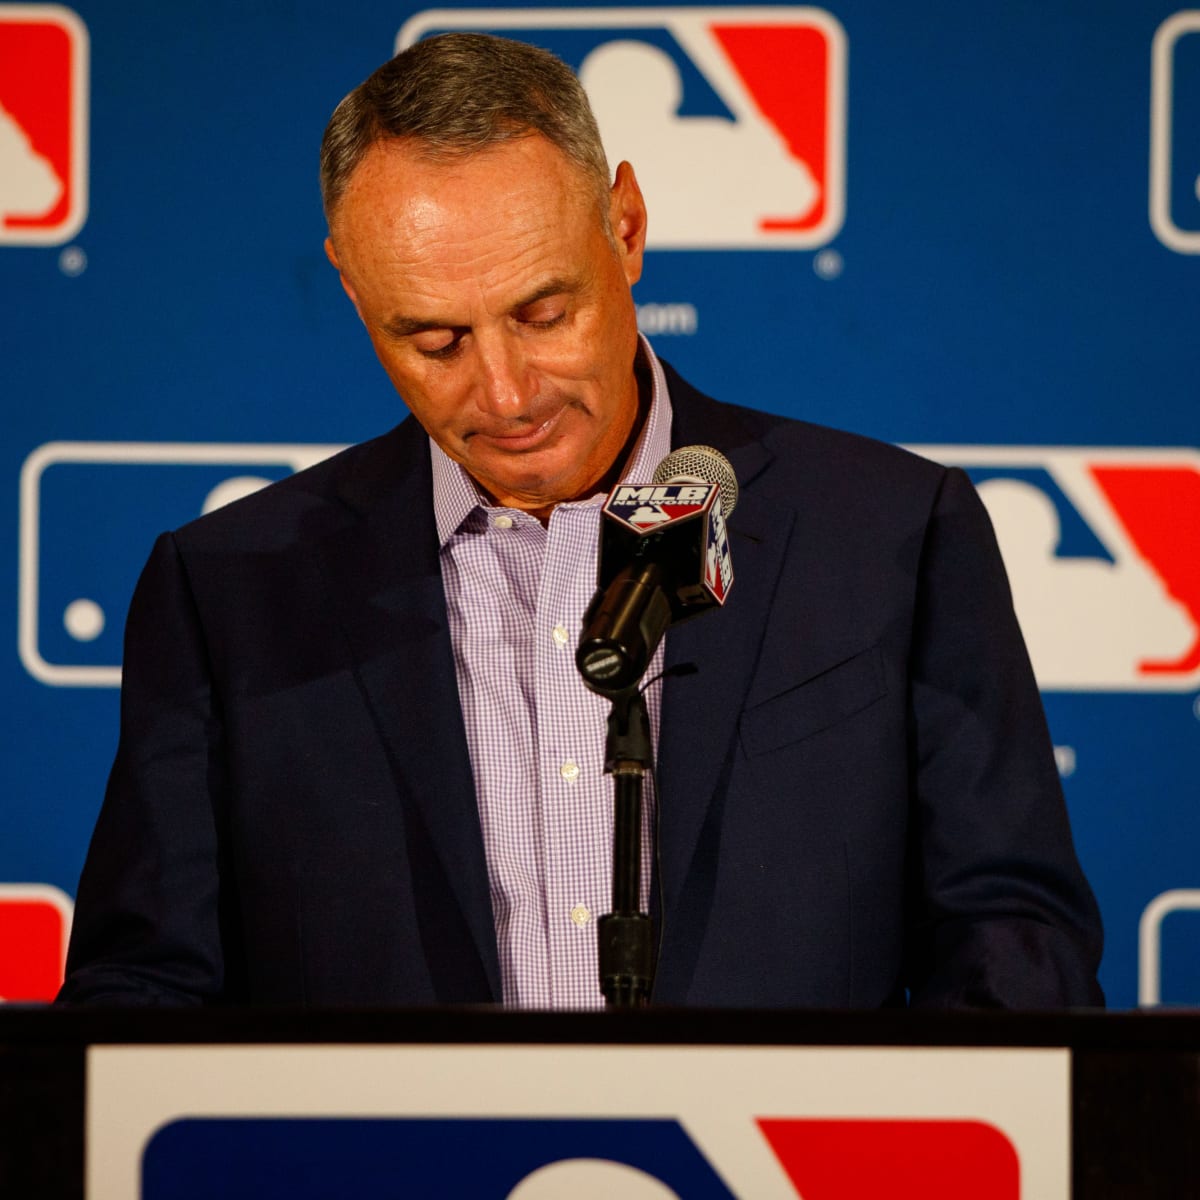 Mets fire manager Carlos Beltrán in wake of Astros sign-stealing scandal